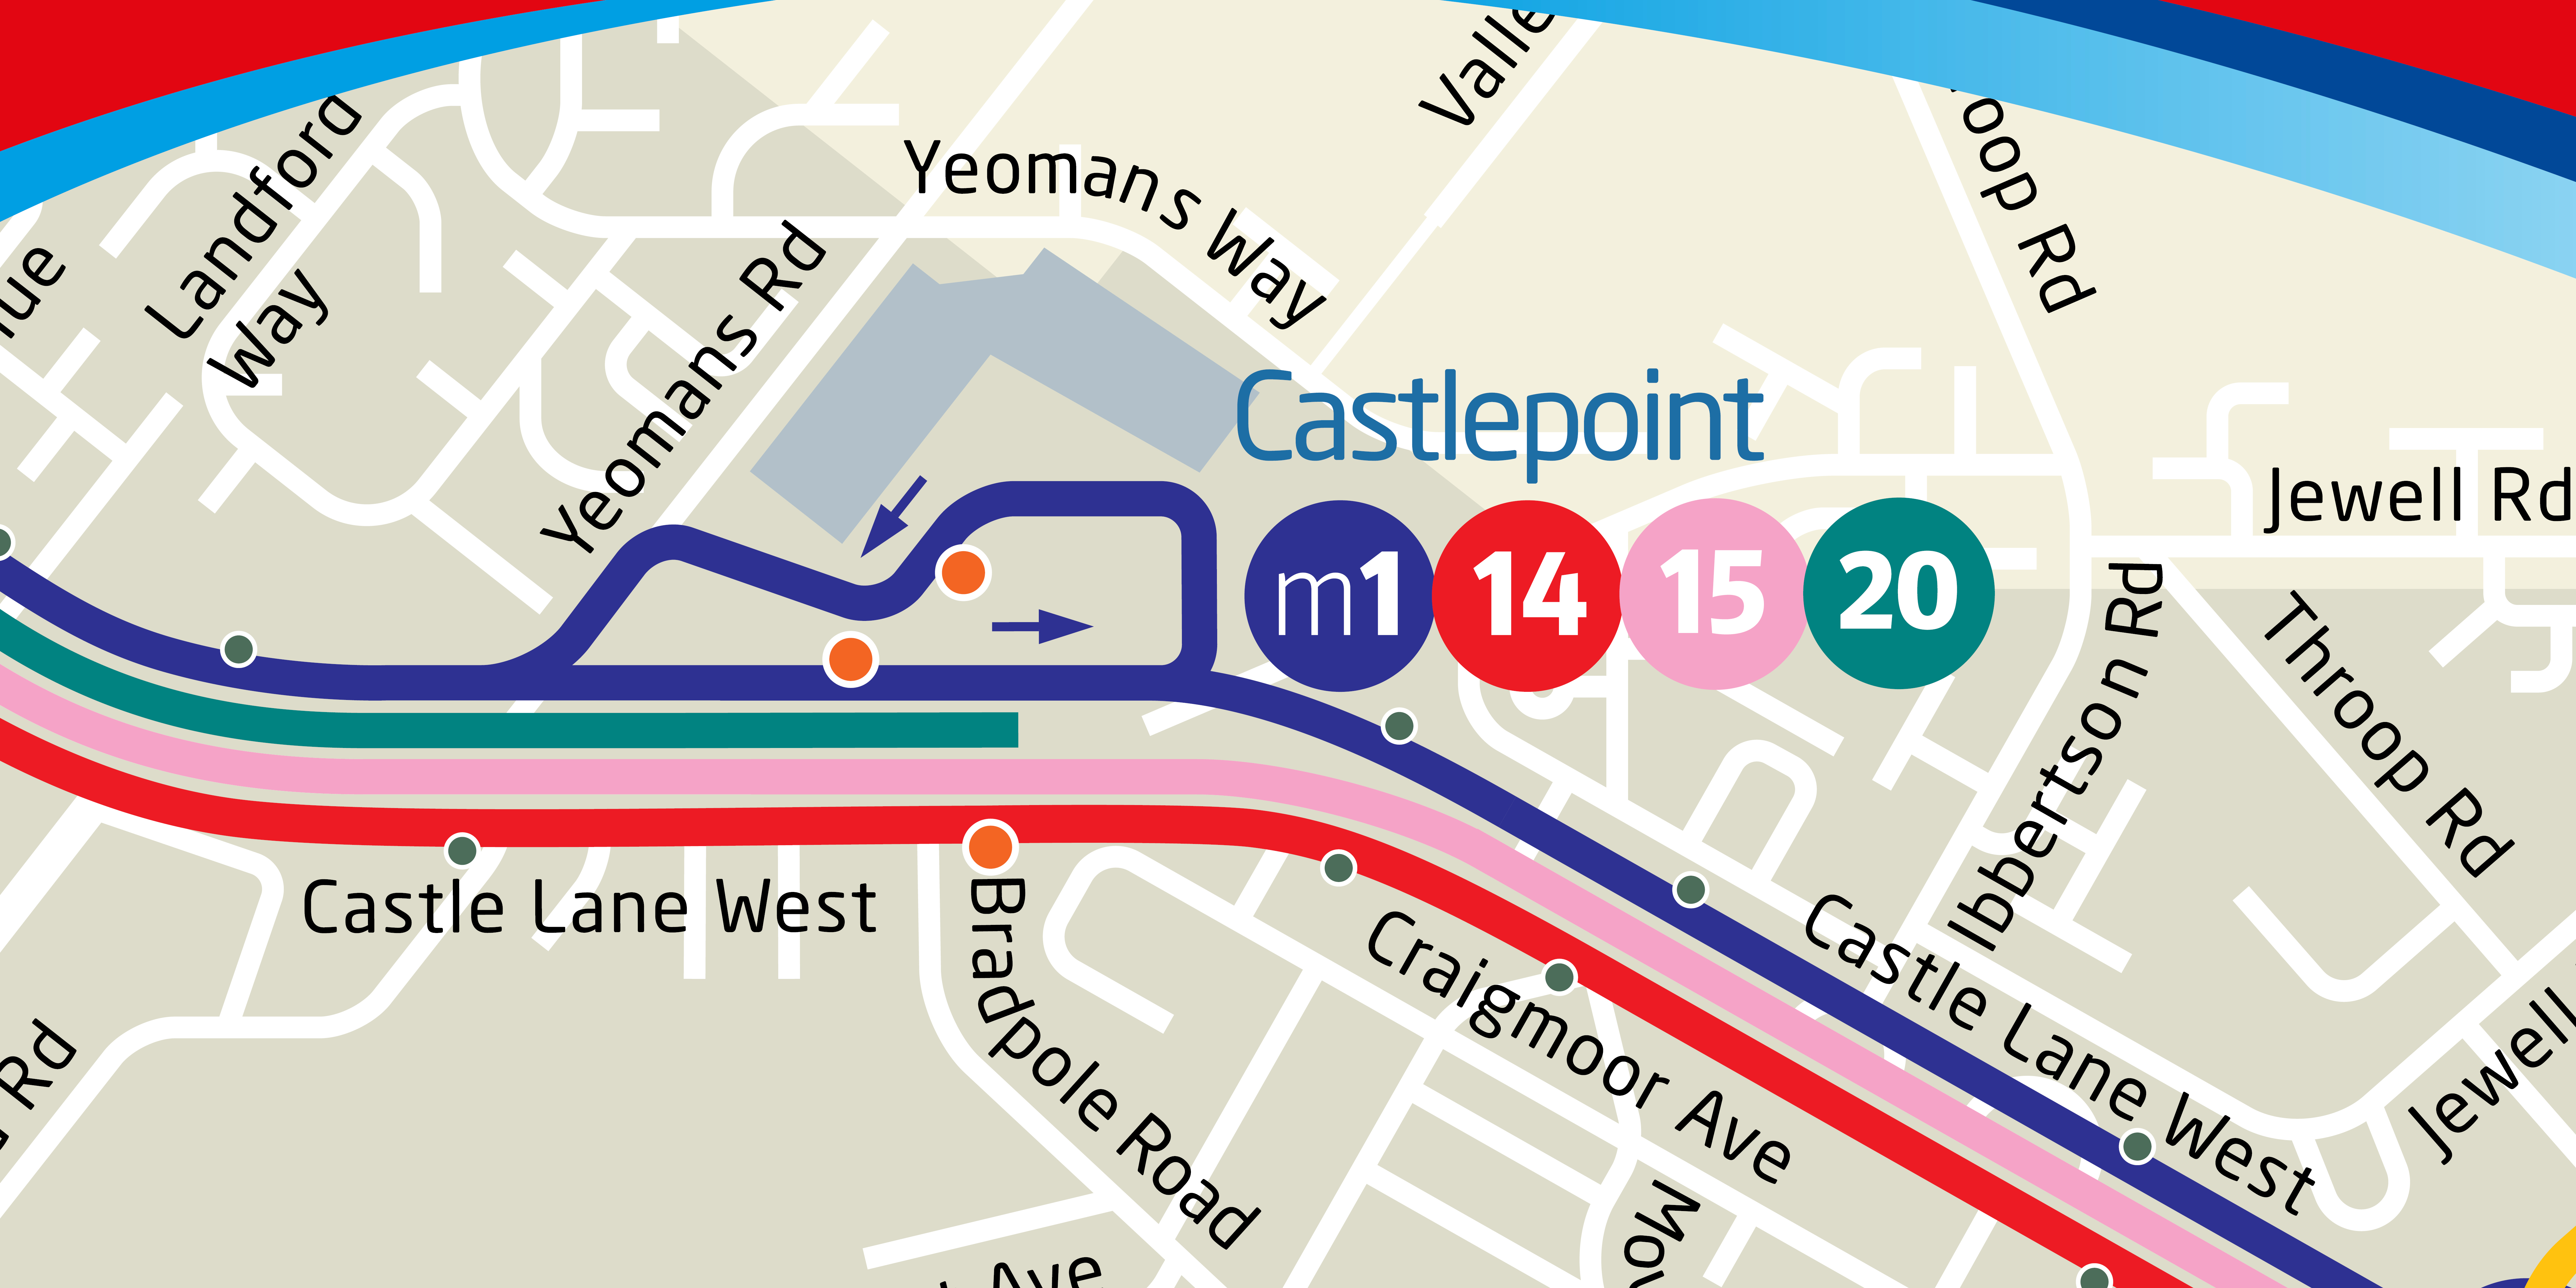 map of castlepoint bus routes